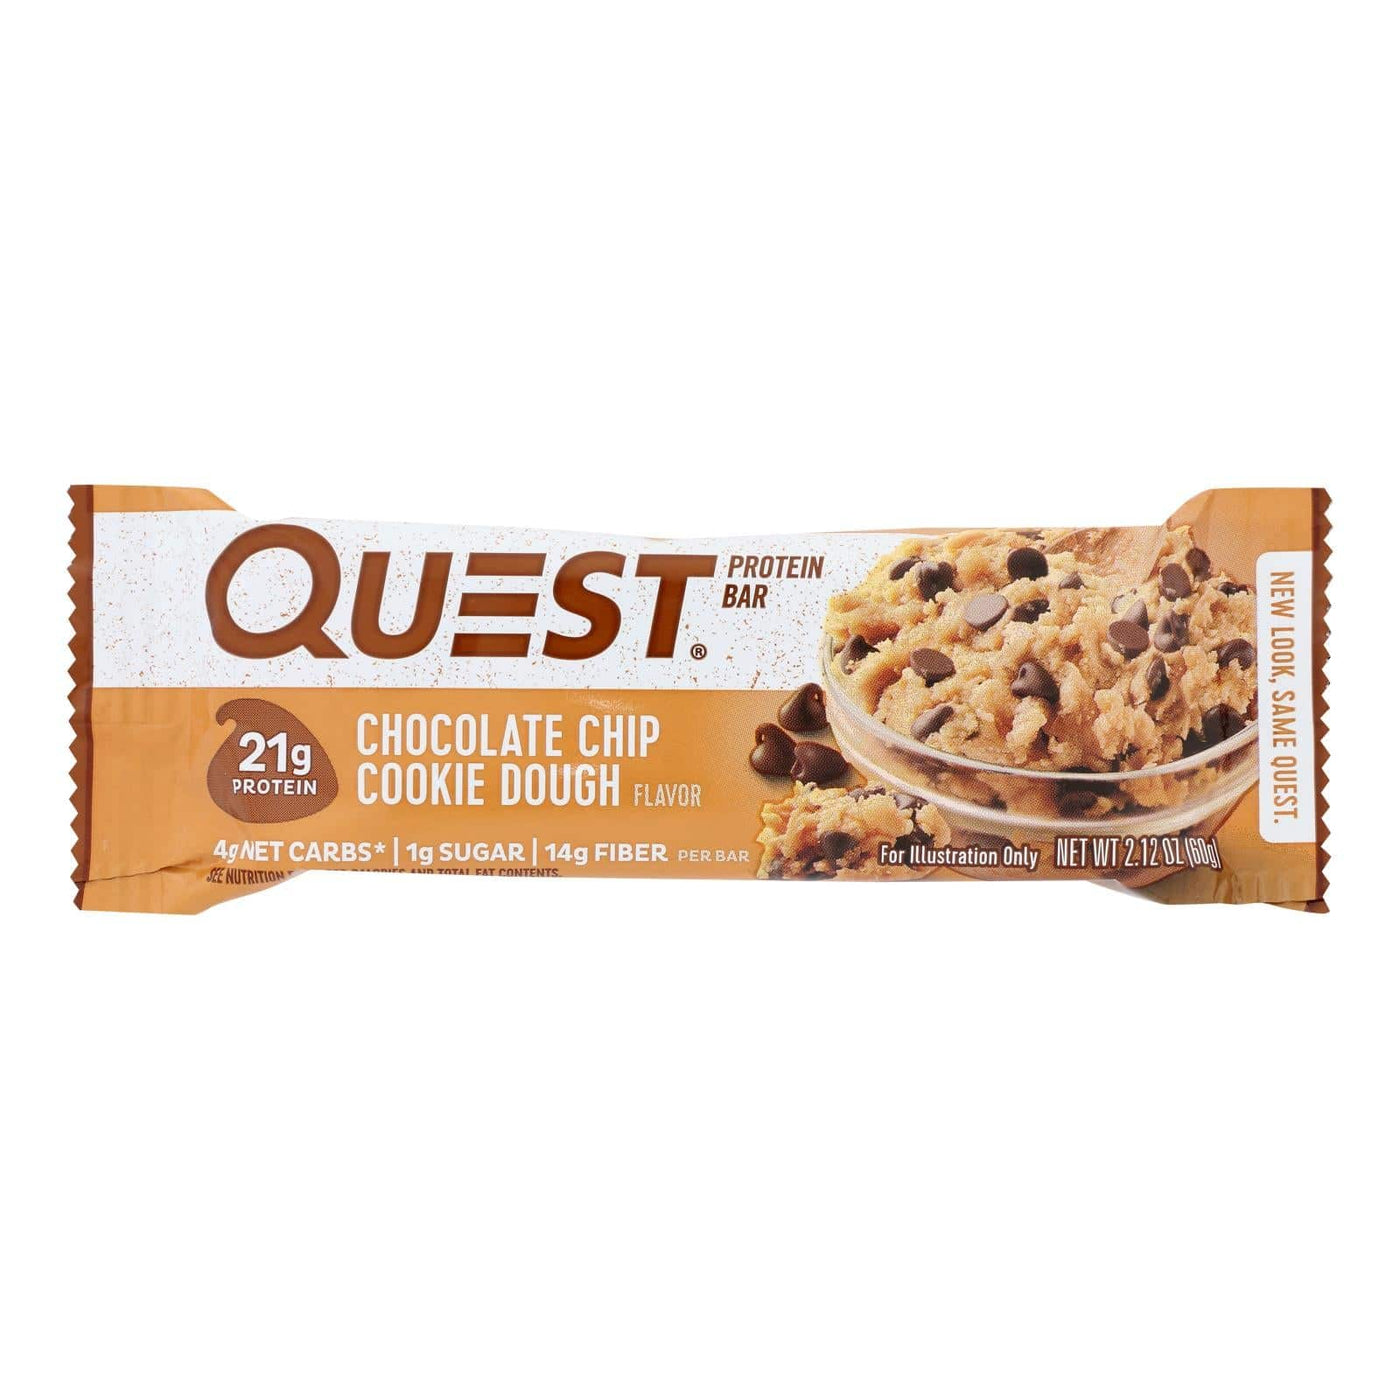 Buy Quest Bar - Chocolate Chip Cookie Dough - 2.12 Oz - Case Of 12  at OnlyNaturals.us